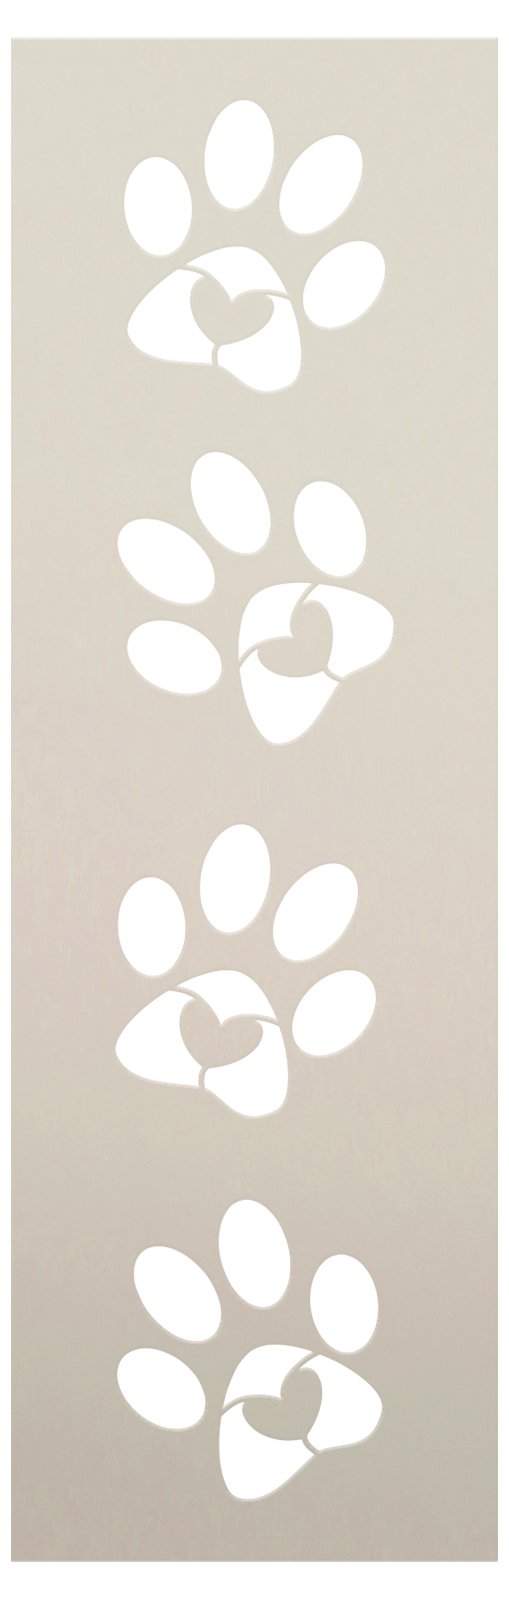 4 Paw Print with Heart Embellishment Stencil by StudioR12 Stencils | Dog Lover | Pet Decor | 11